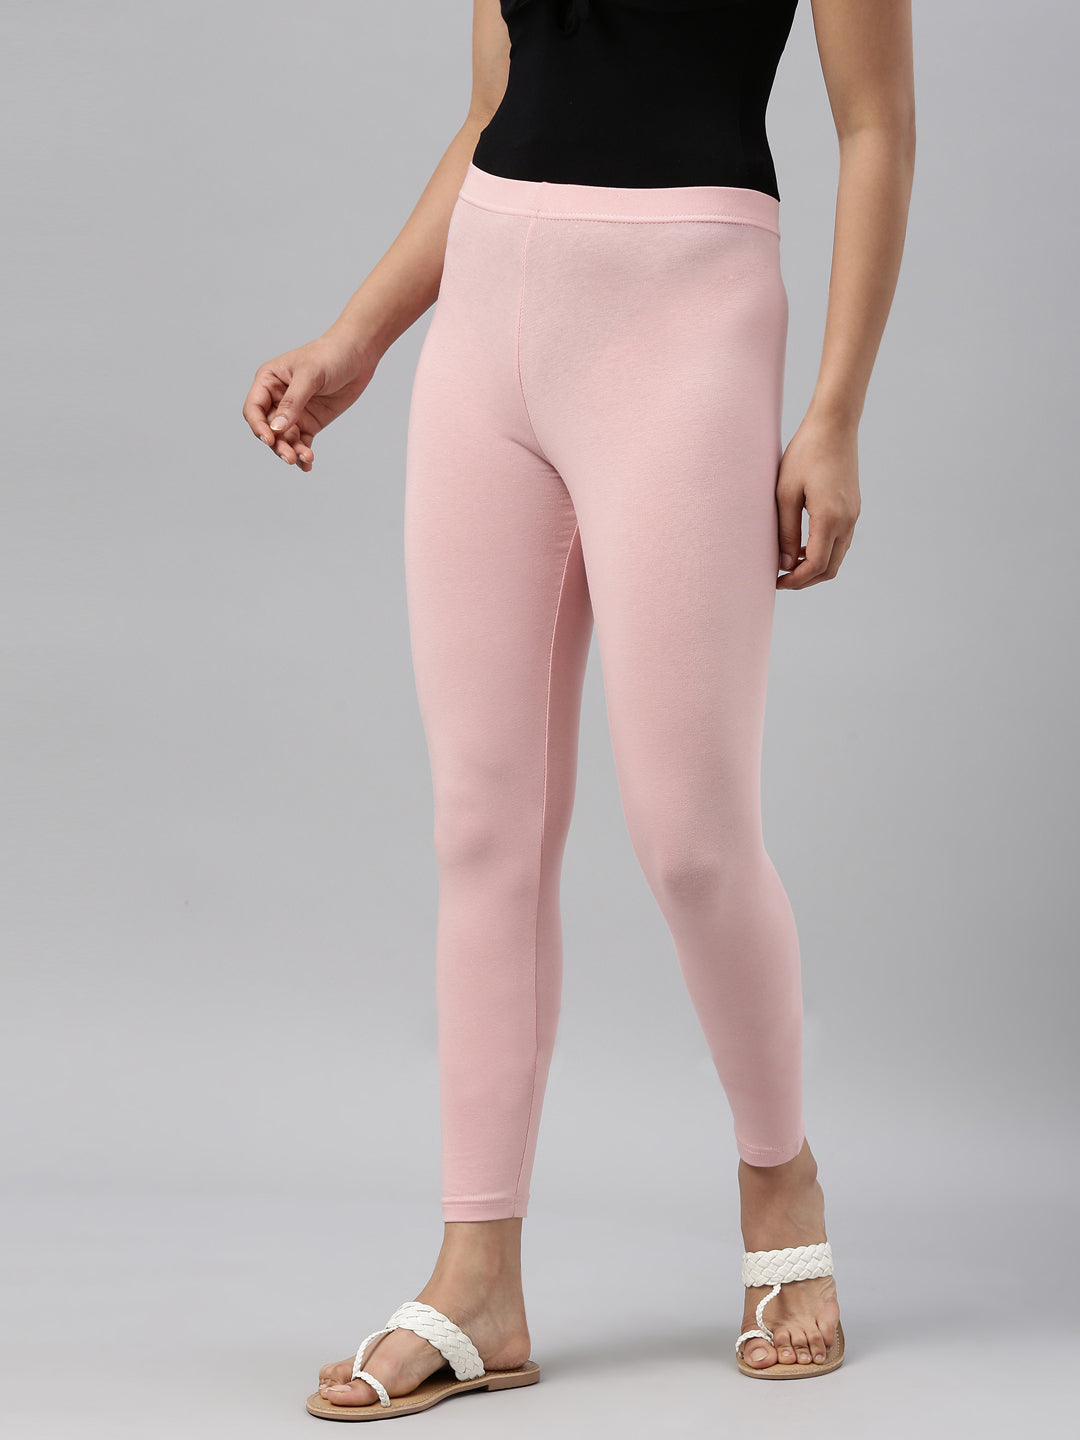 Buy QYNSIK High Waisted Soft Stretchable Cotton Ankle Length Leggings for  Women (Pink) at